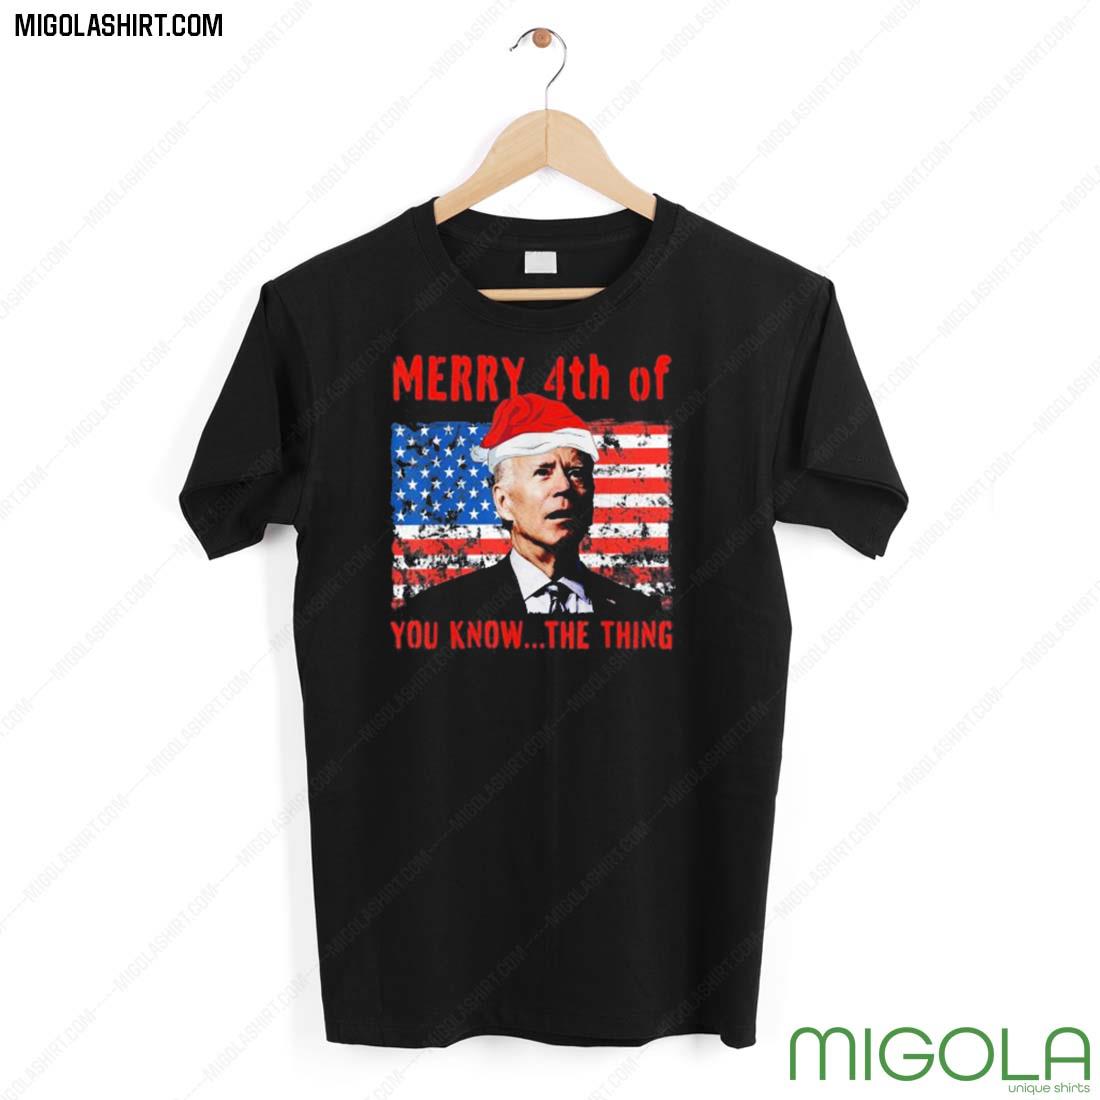 Merry 4th Of You Know…the Thing Shirt